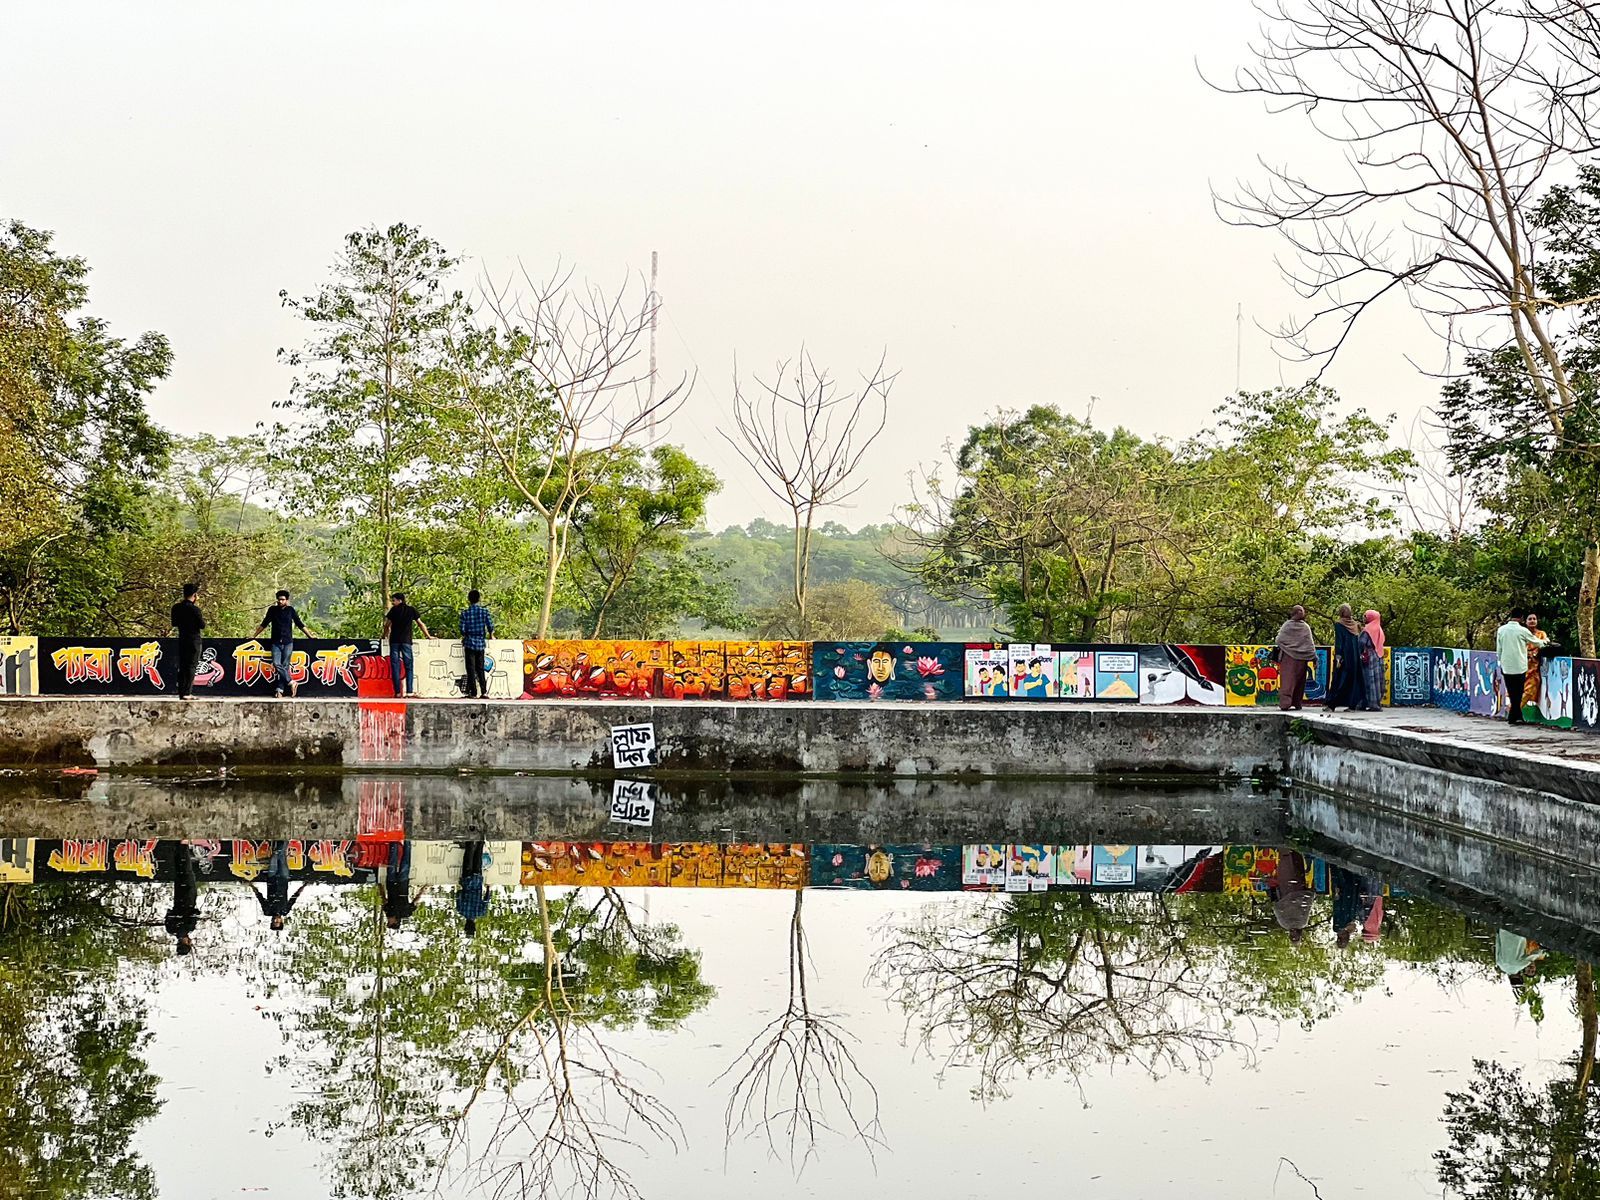 People stand near a reflective reservoir surrounded by trees in an urban setting